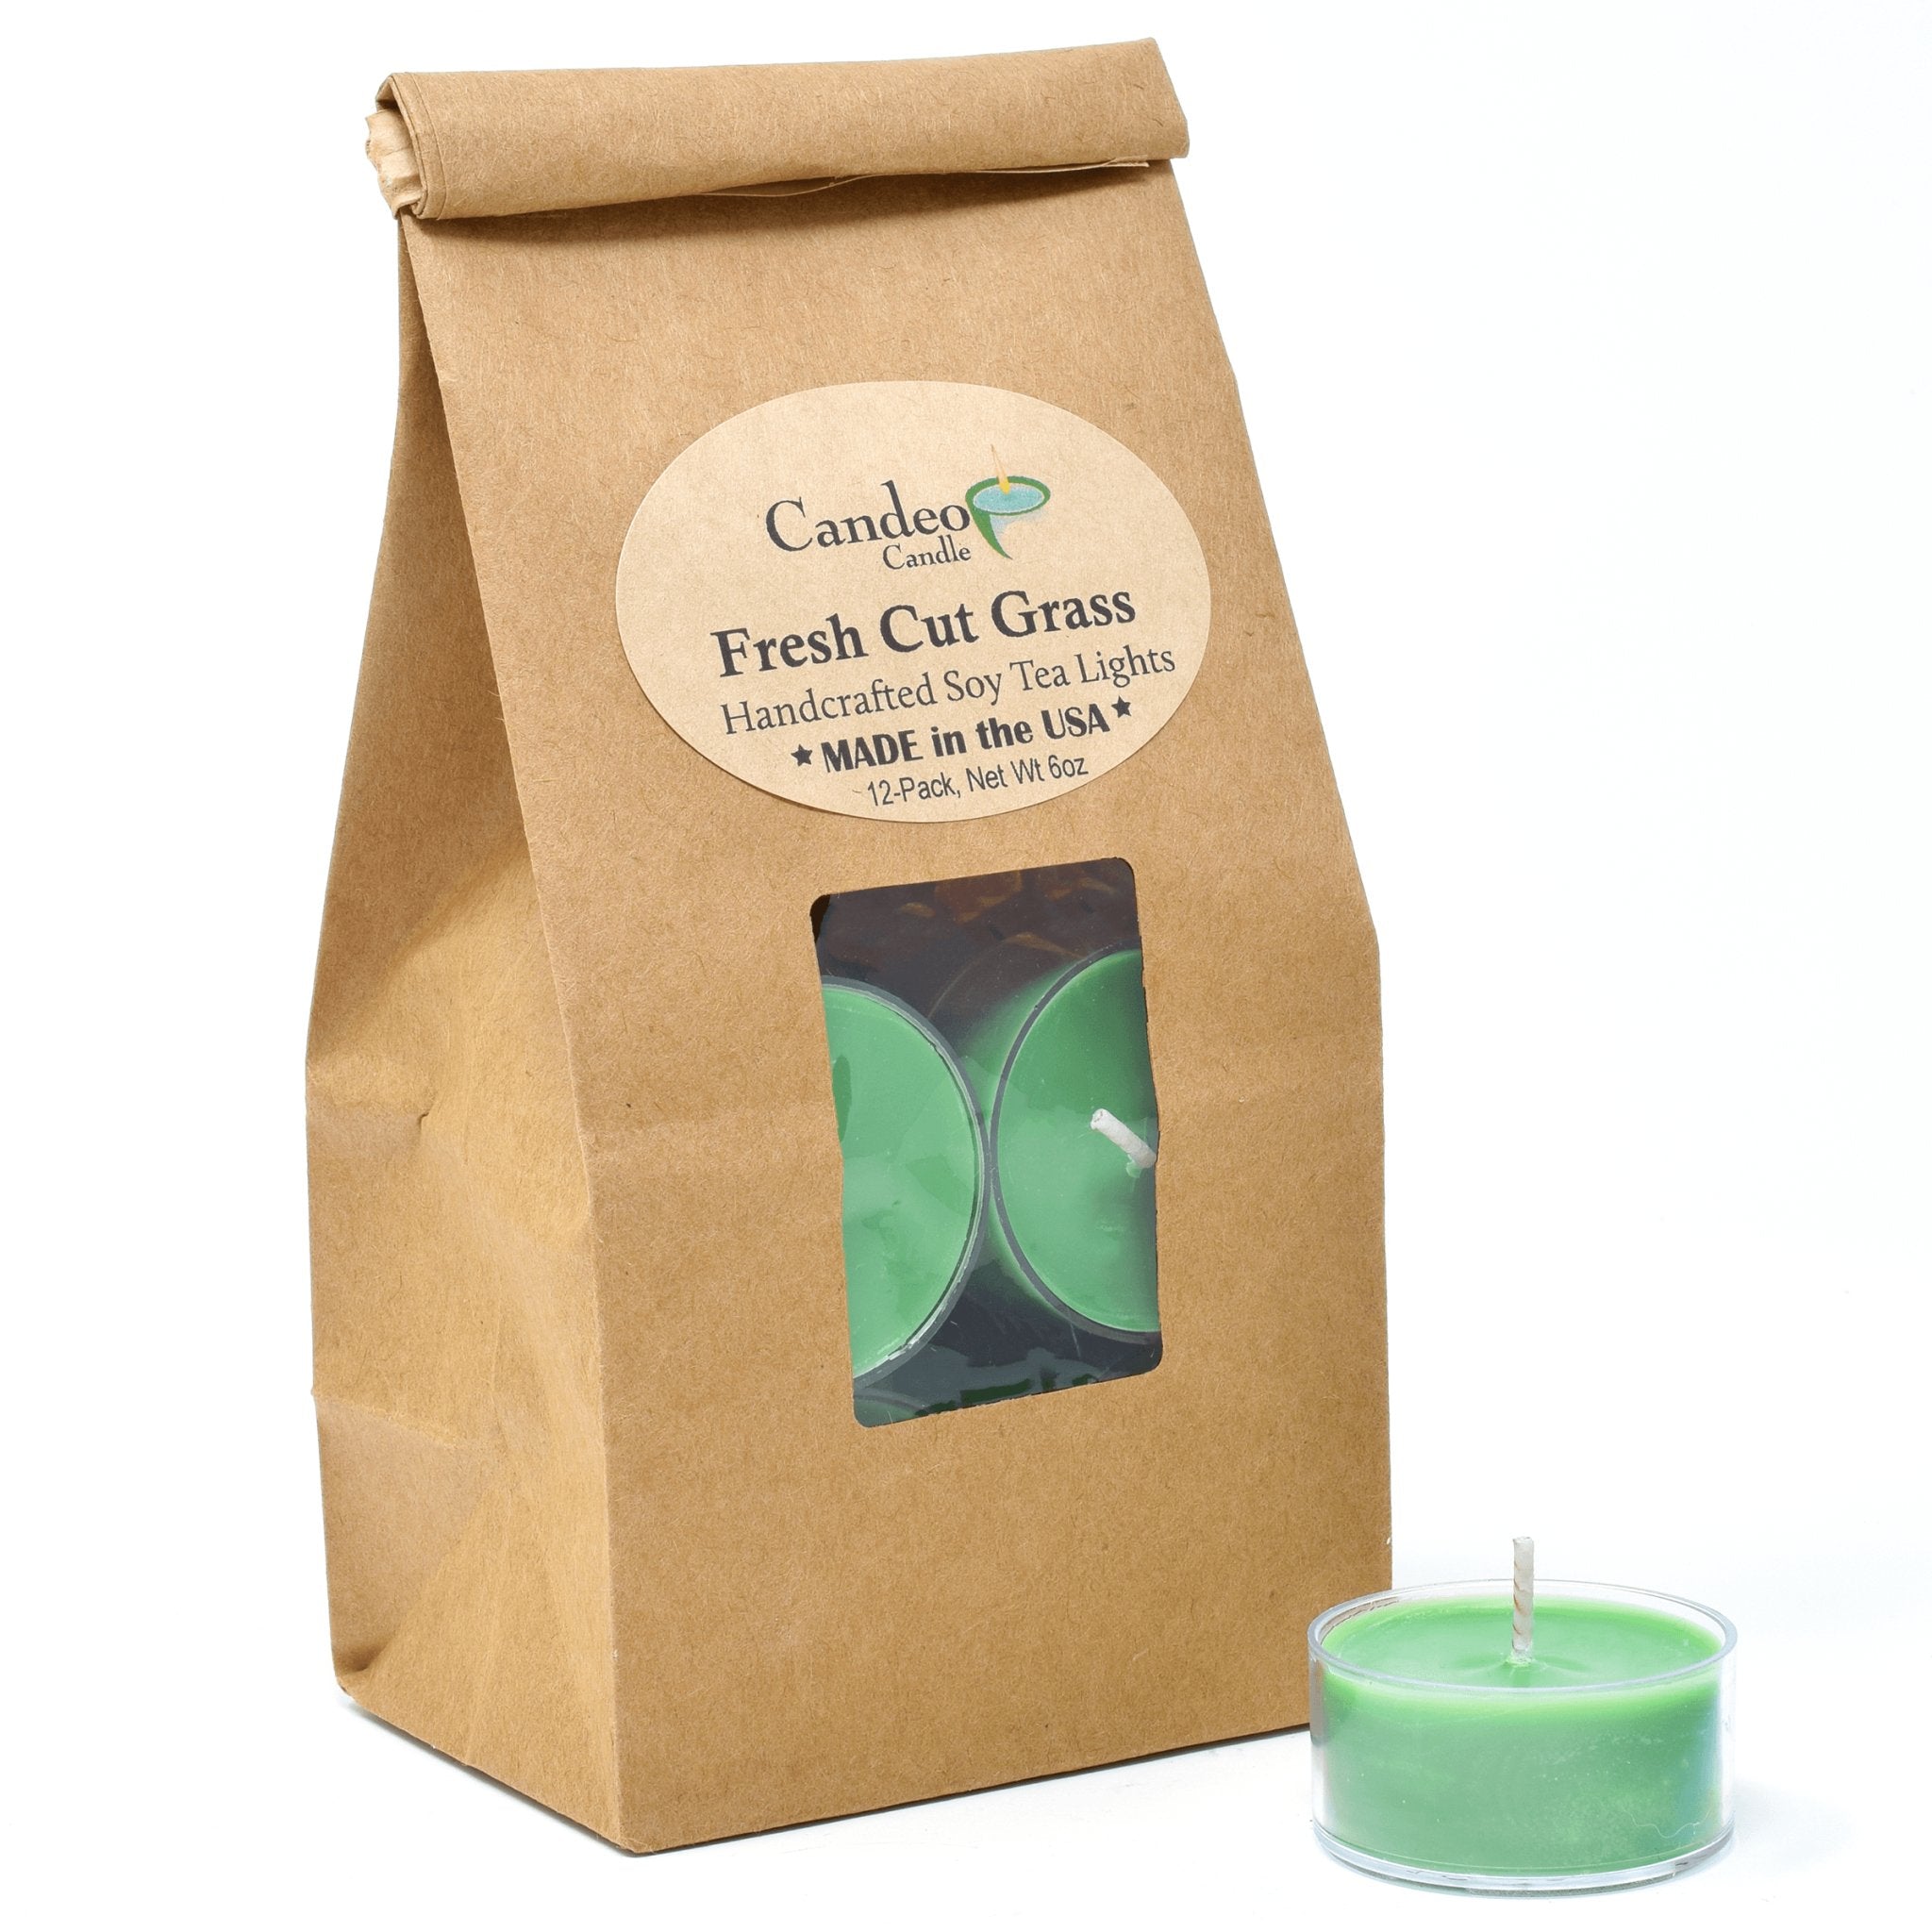 Fresh Cut Grass, Soy Tea Light 12-Pack - Candeo Candle